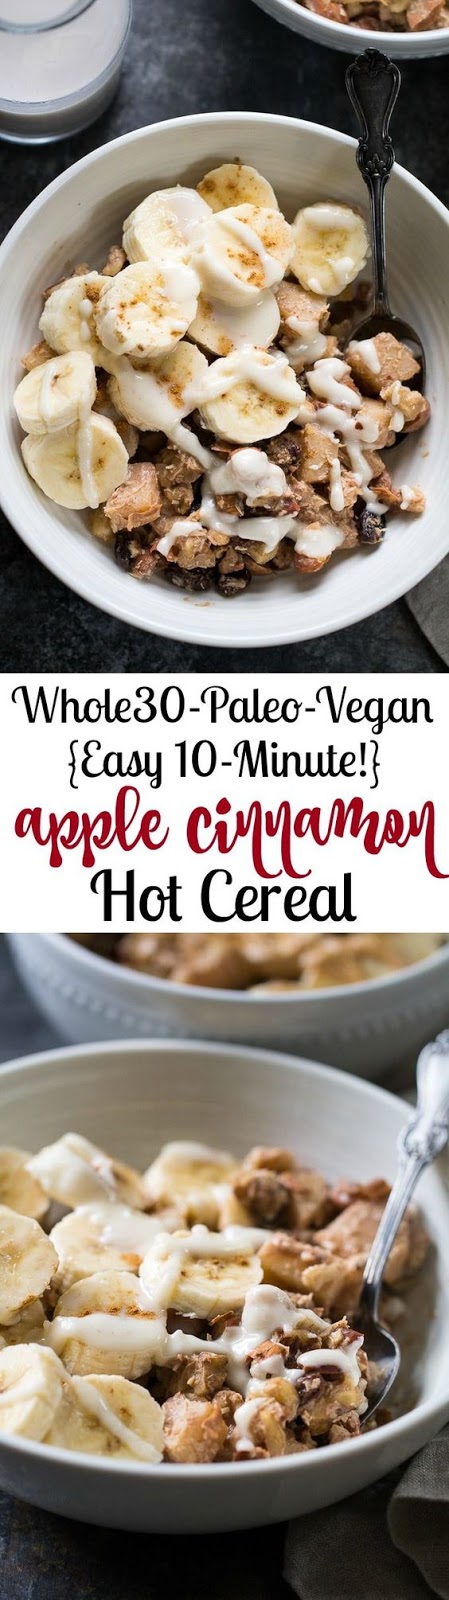 This easy Apple Cinnamon Paleo Hot Cereal is ready in just 10 minutes, free of added sugar, Paleo, Whole30 compliant and vegan. Just as delicious for an afternoon snack as it is for breakfast!